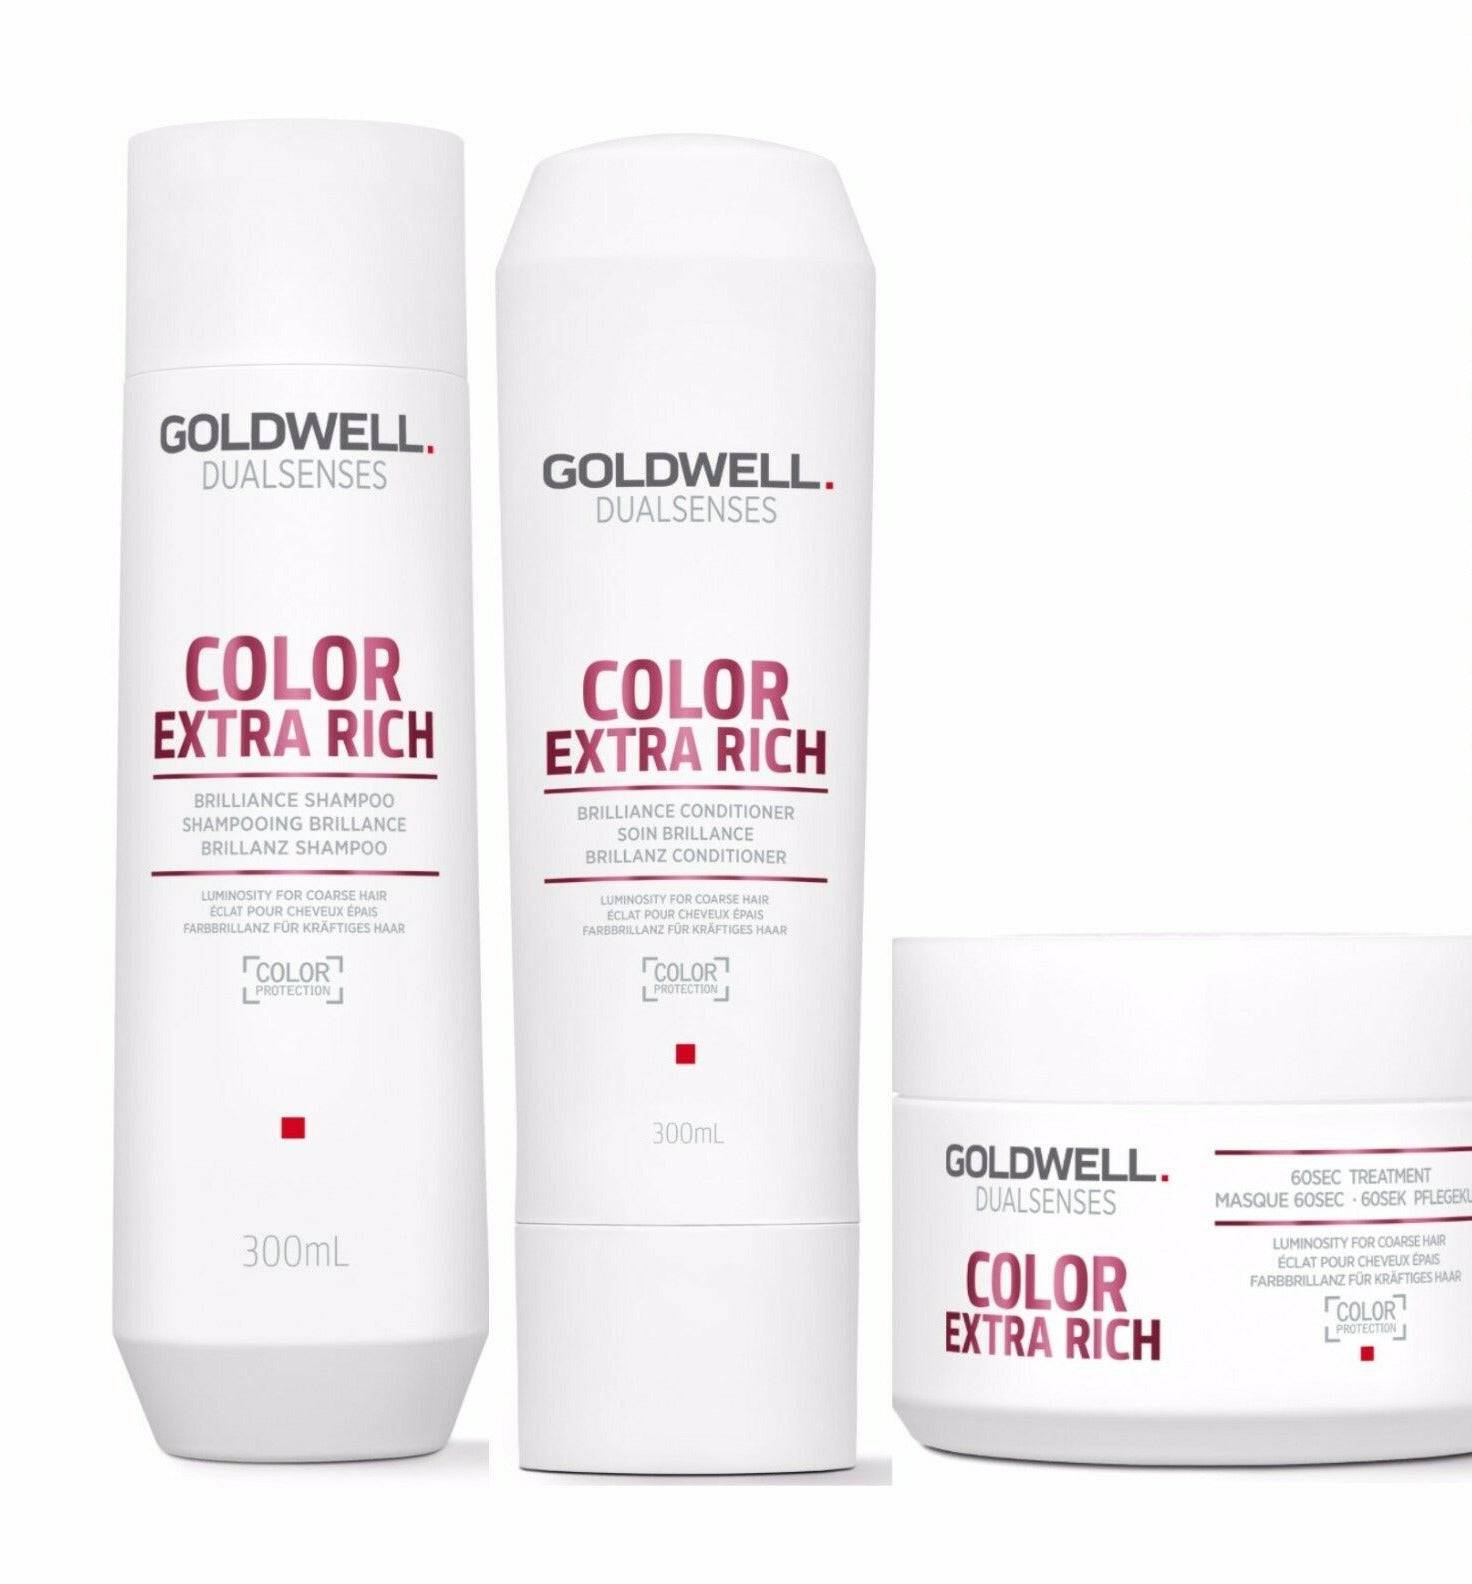 Goldwell Color Extra Rich Brilliance Shampoo Conditioner 60secs Treatment Trio - On Line Hair Depot